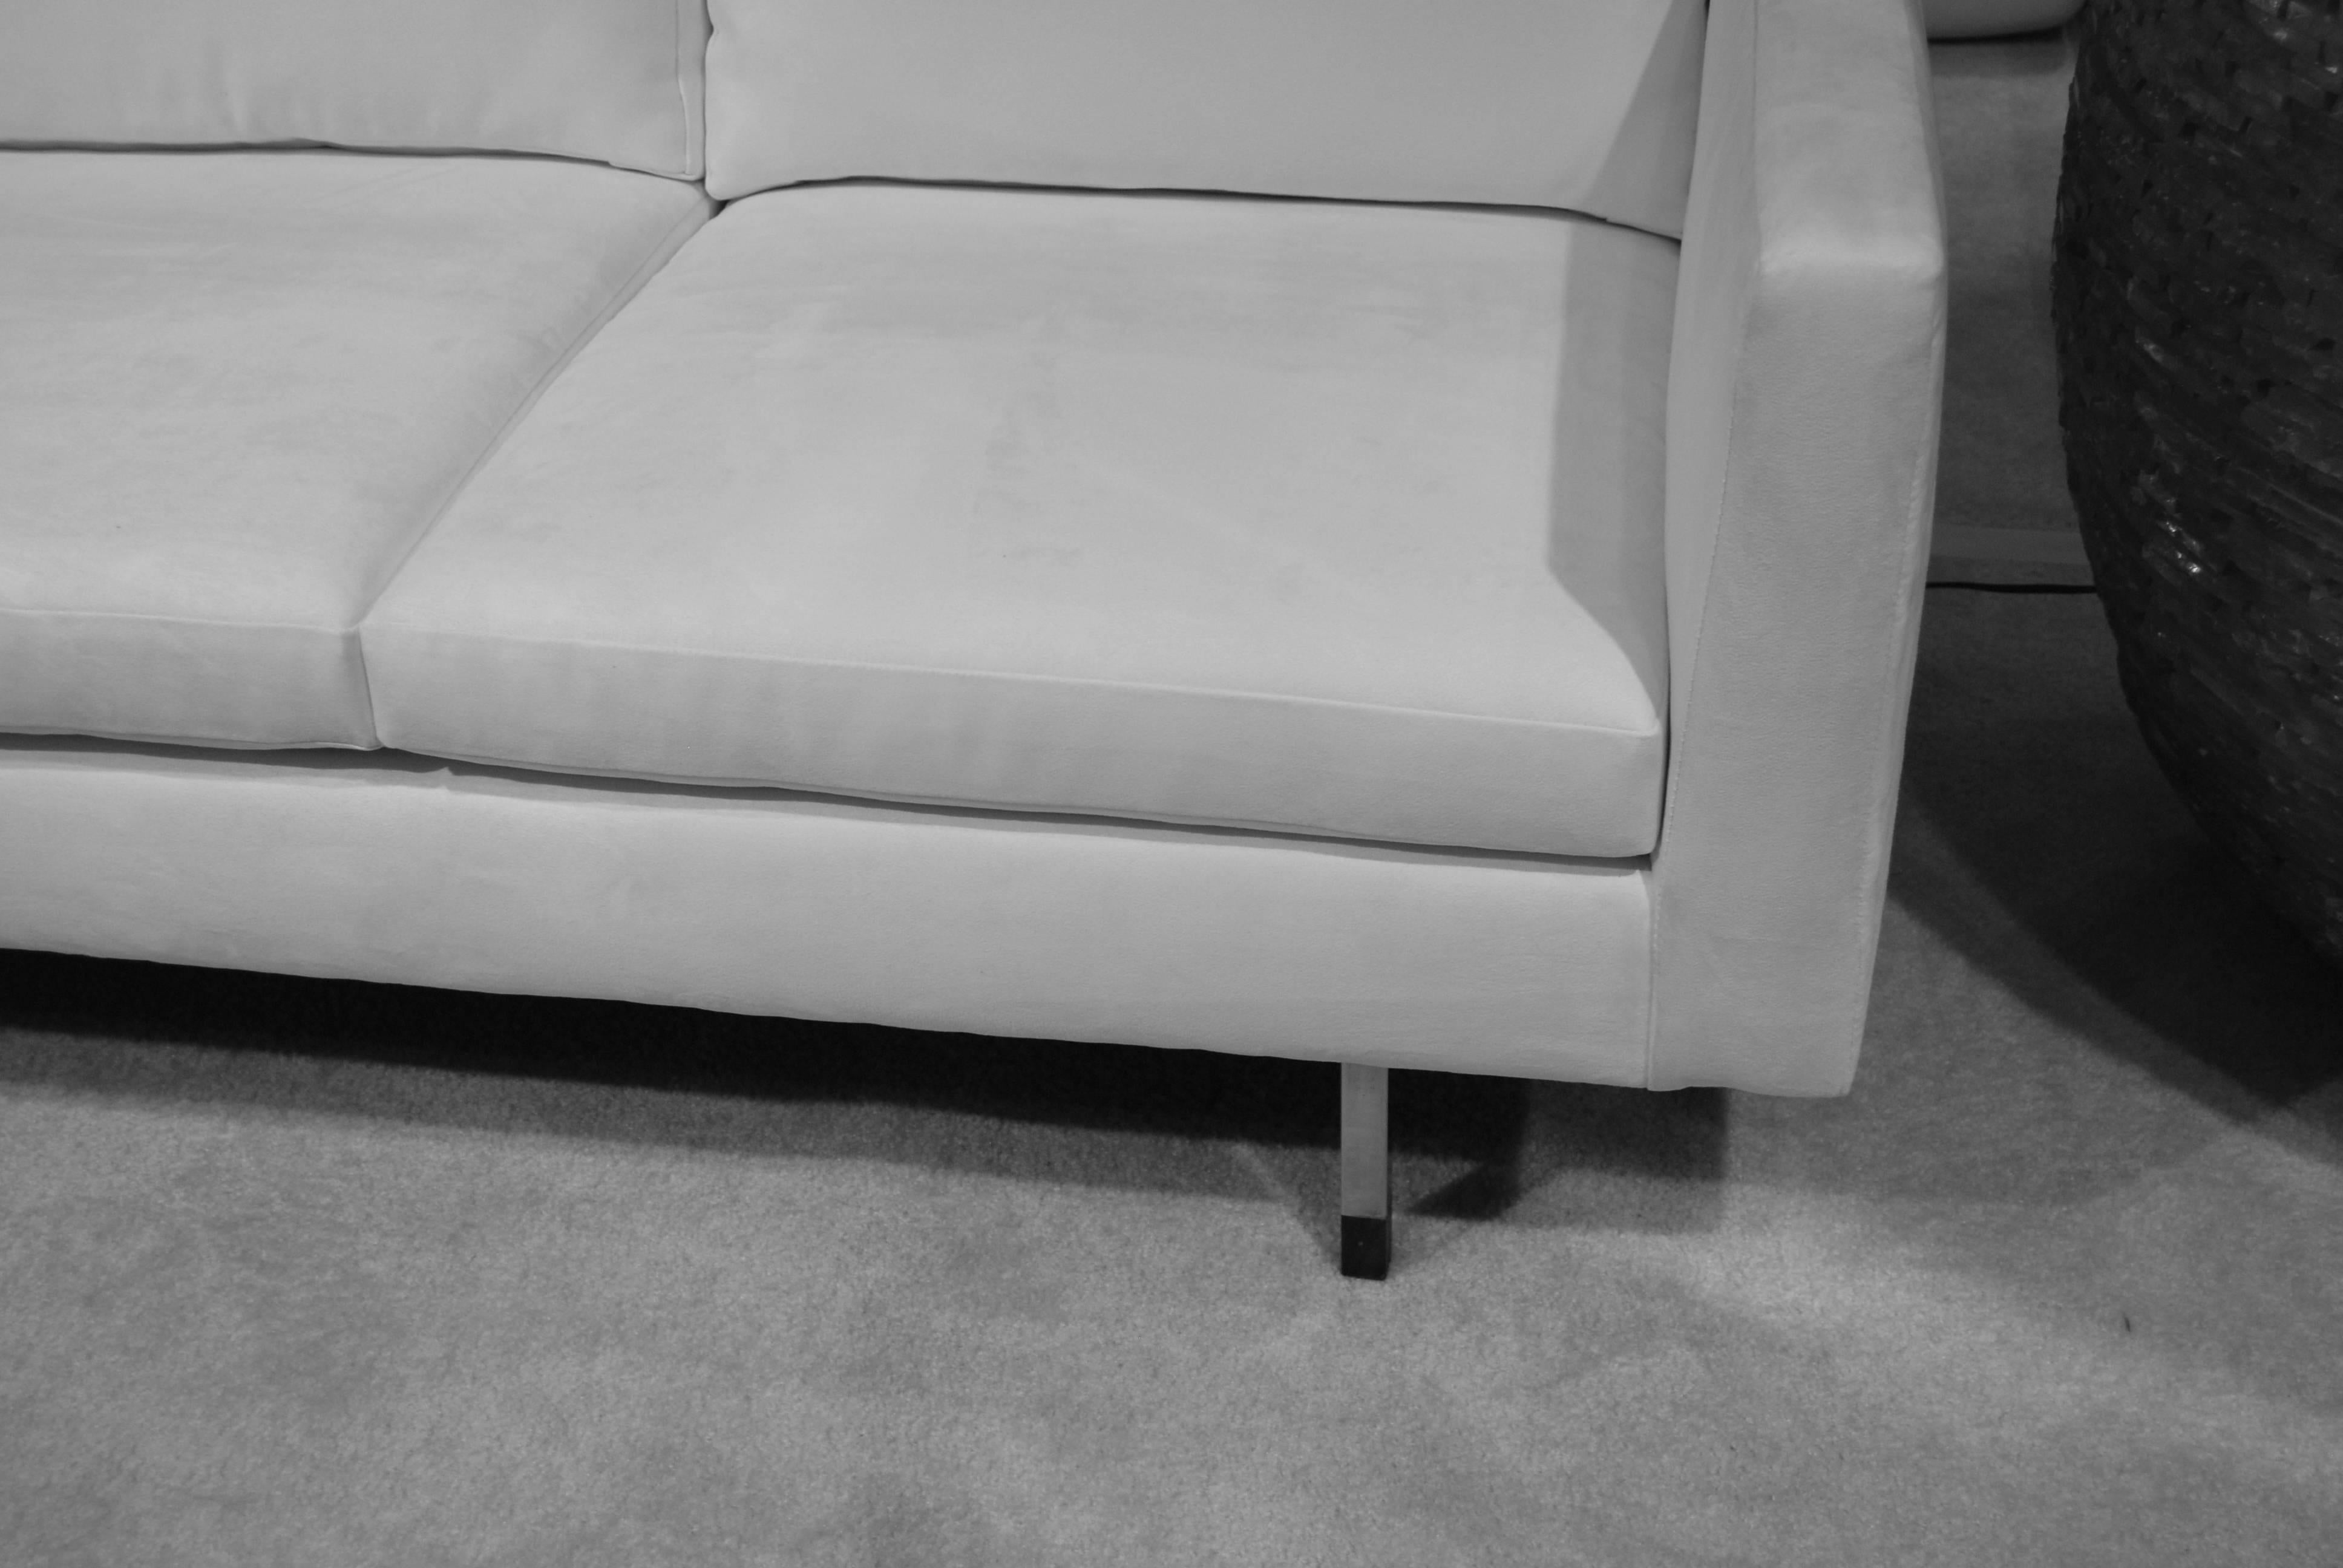 These Knoll attributed sofas are covered in high quality white ultra suede.